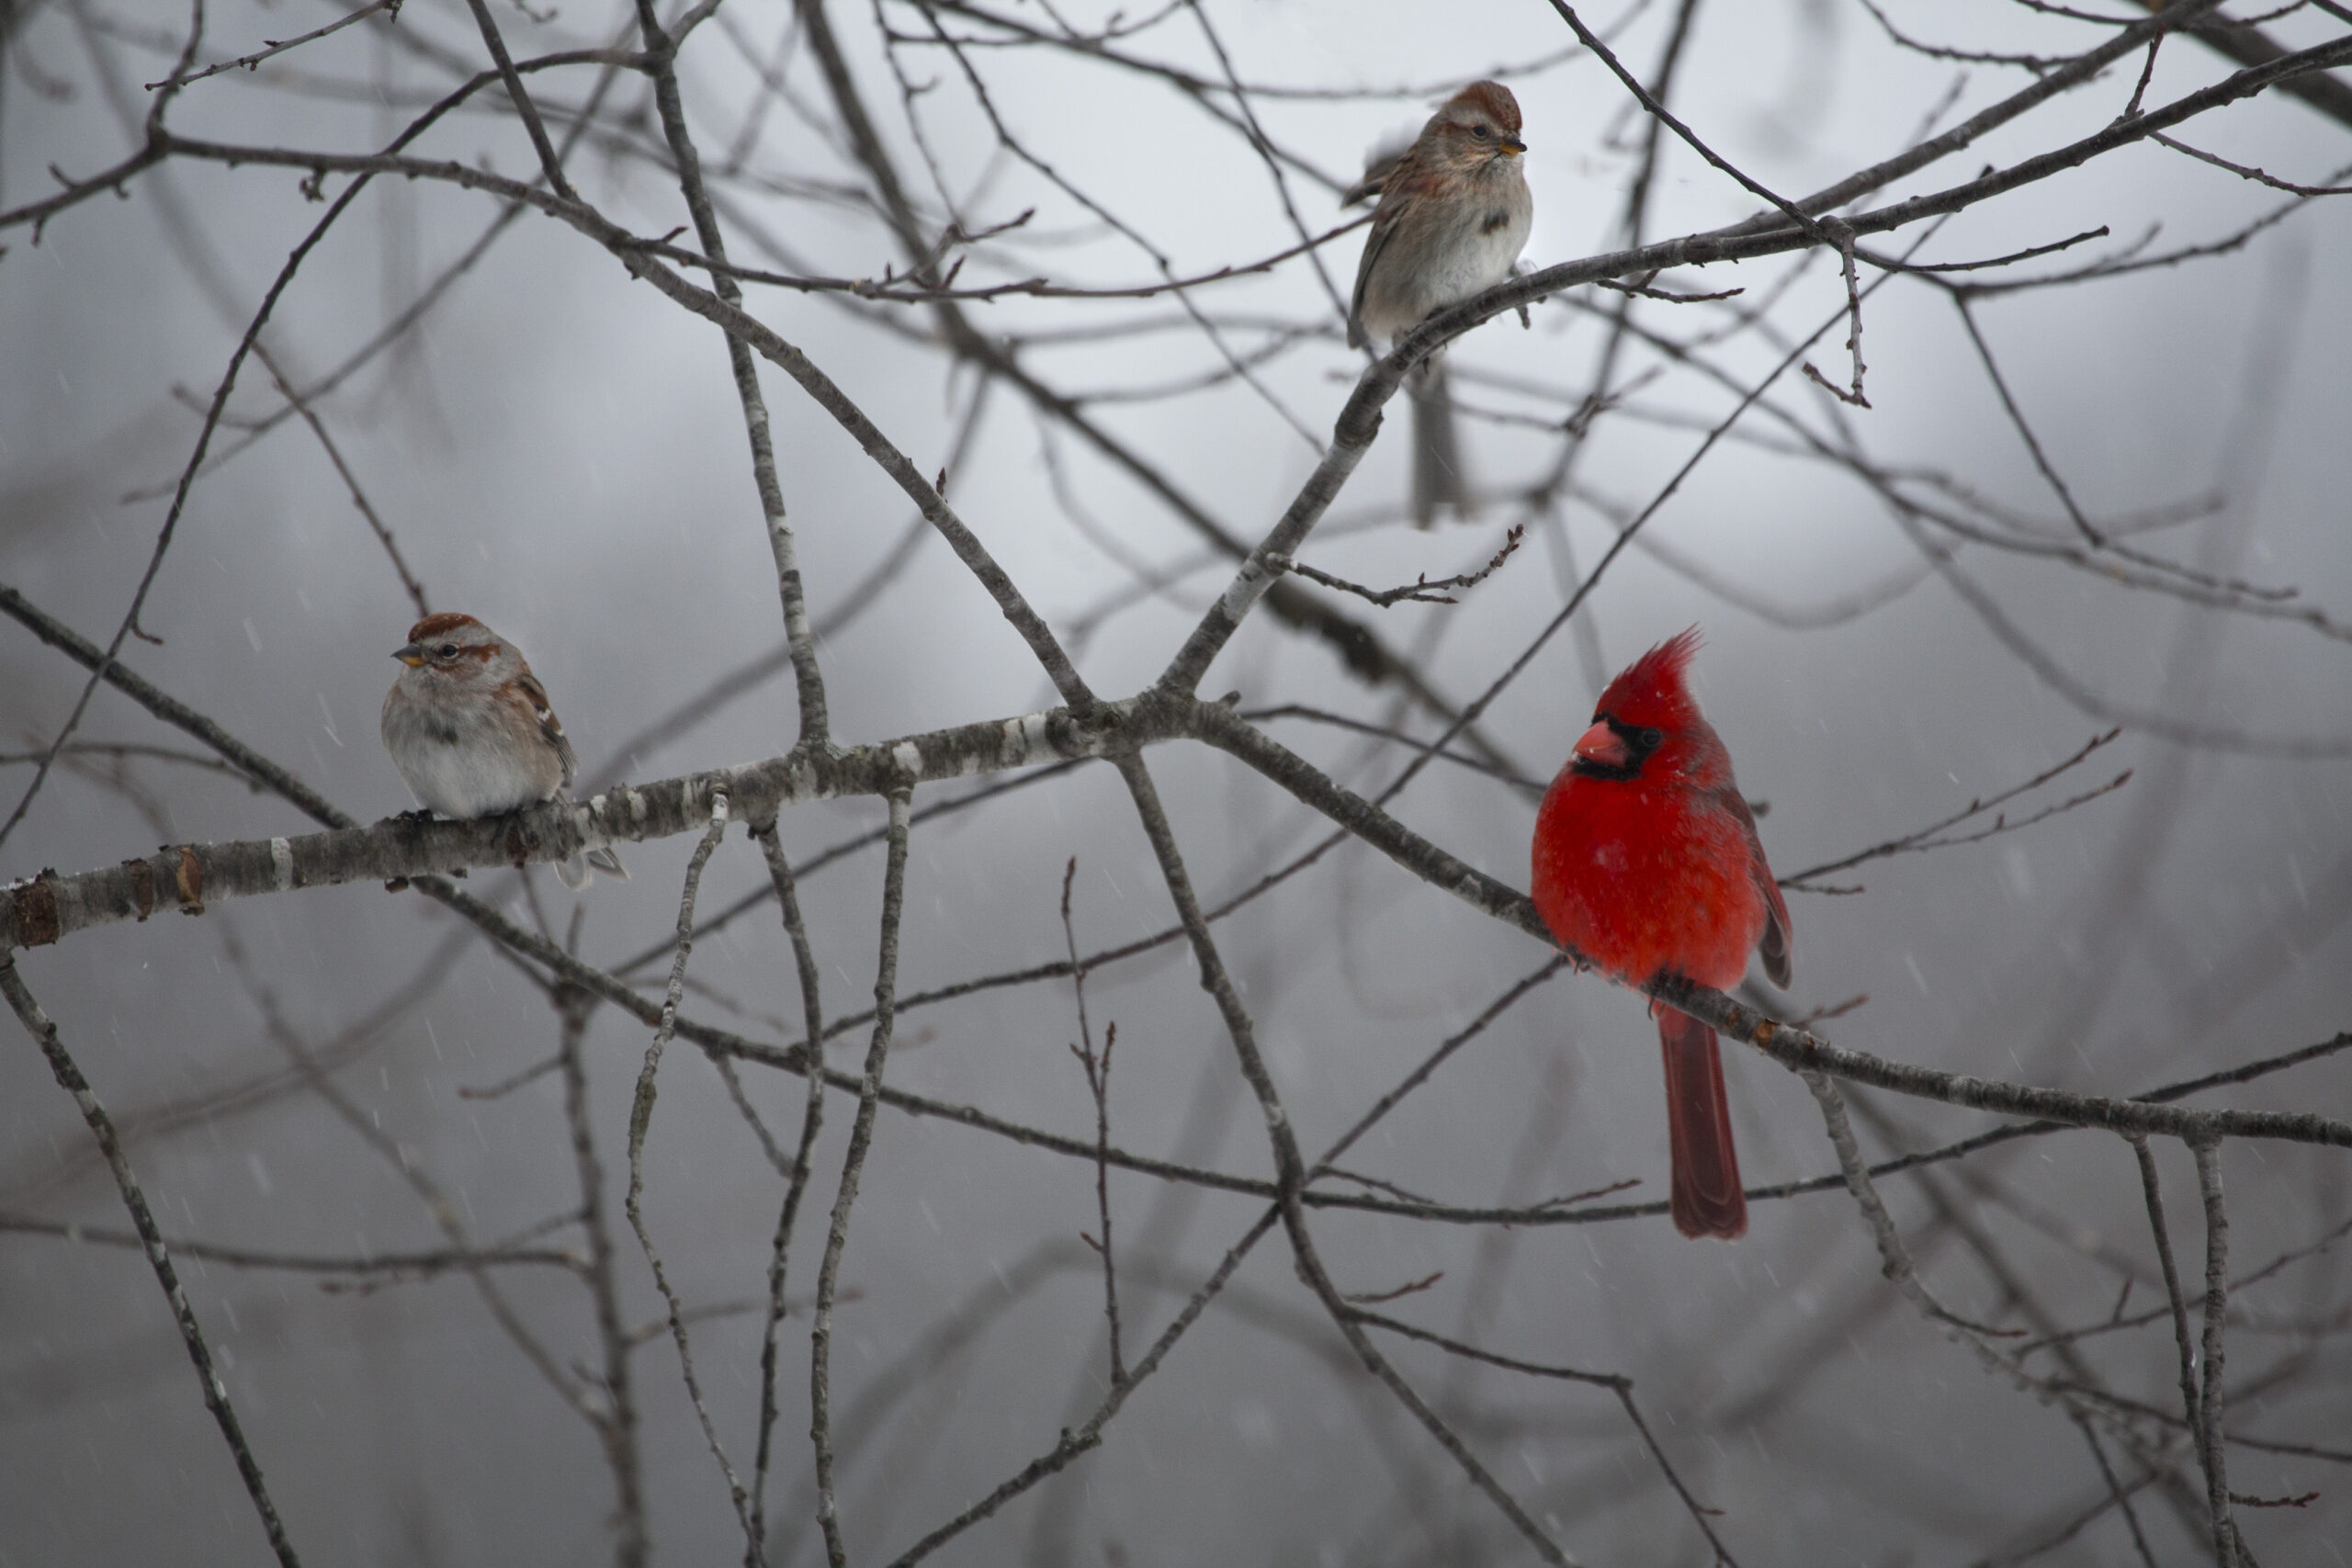 A Cardinal and two sparrows on branch.